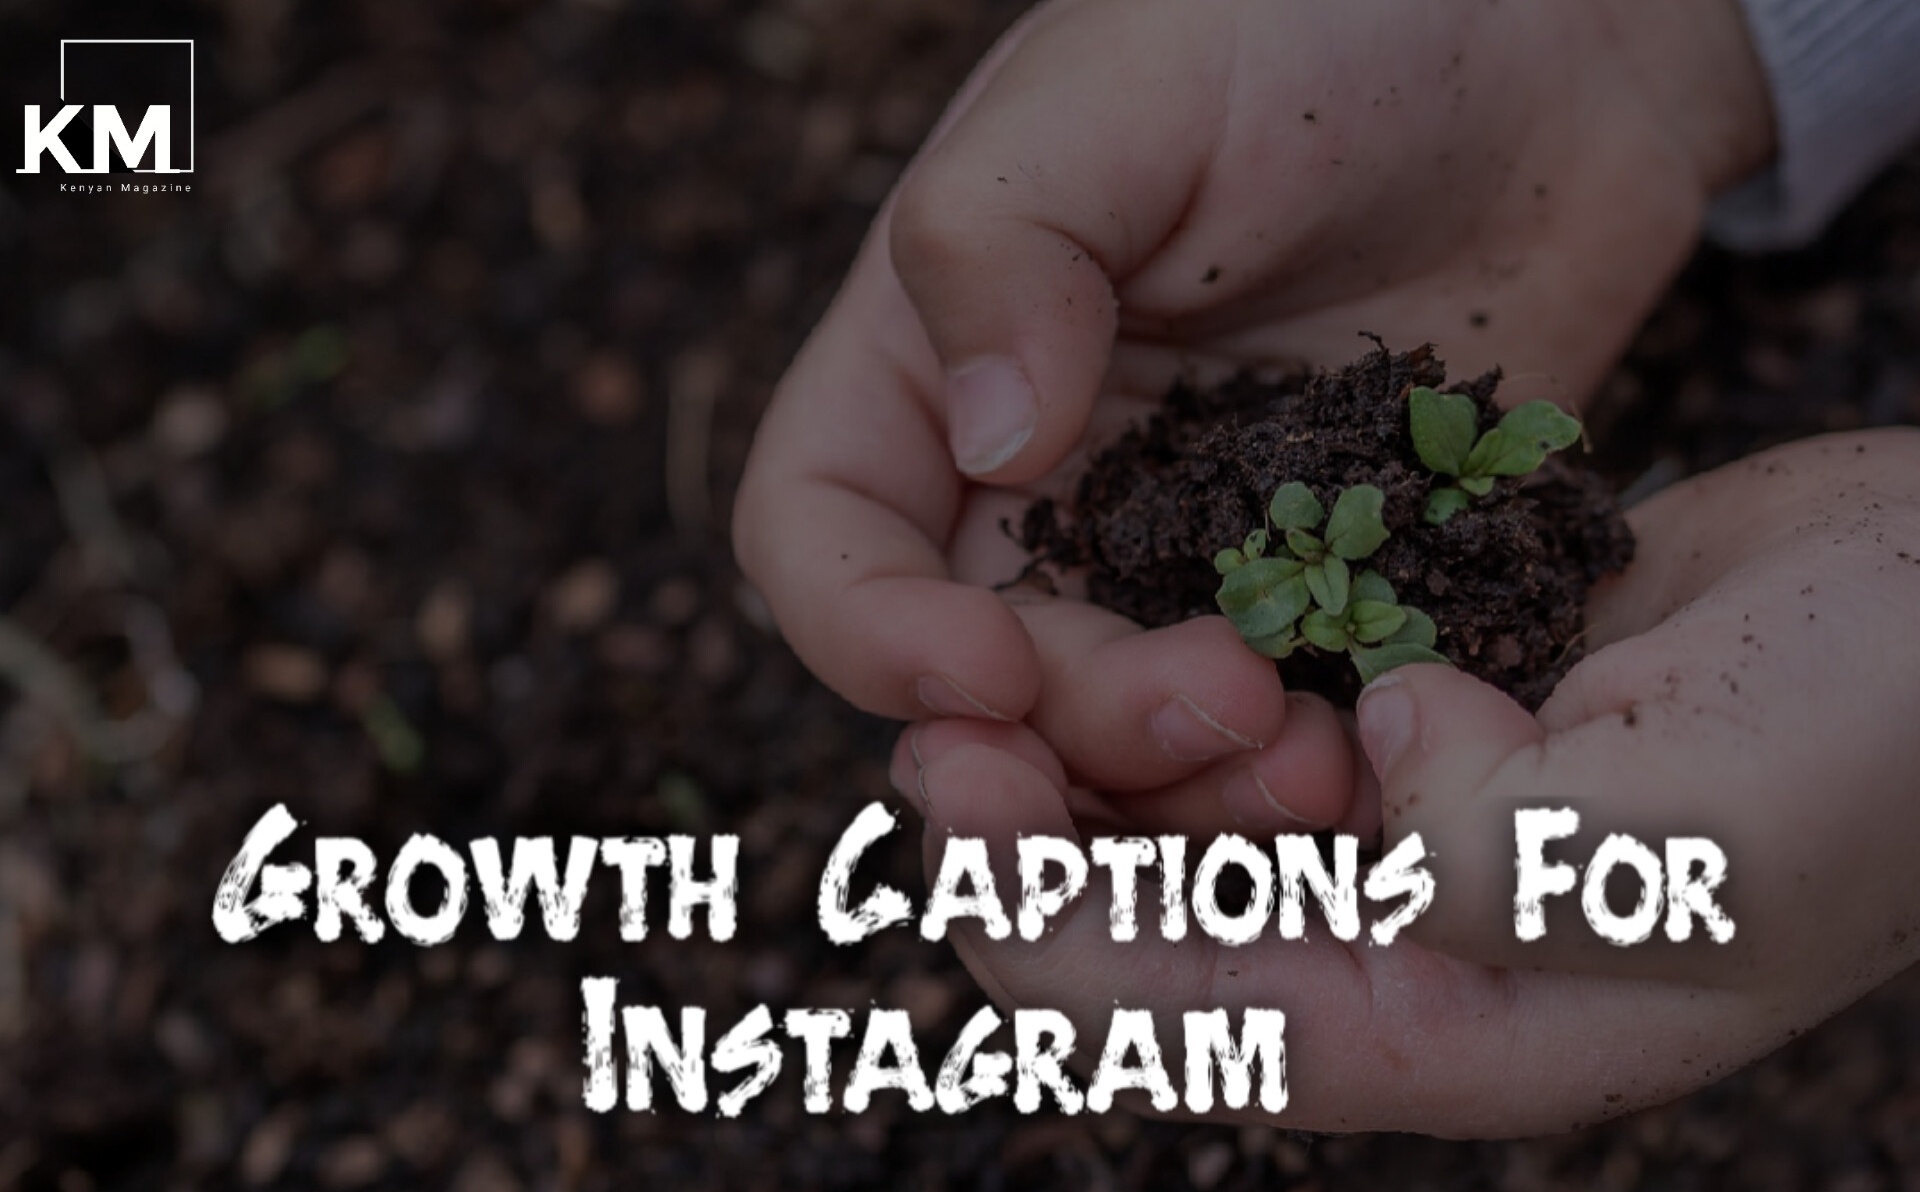 Growth captions for Instagram